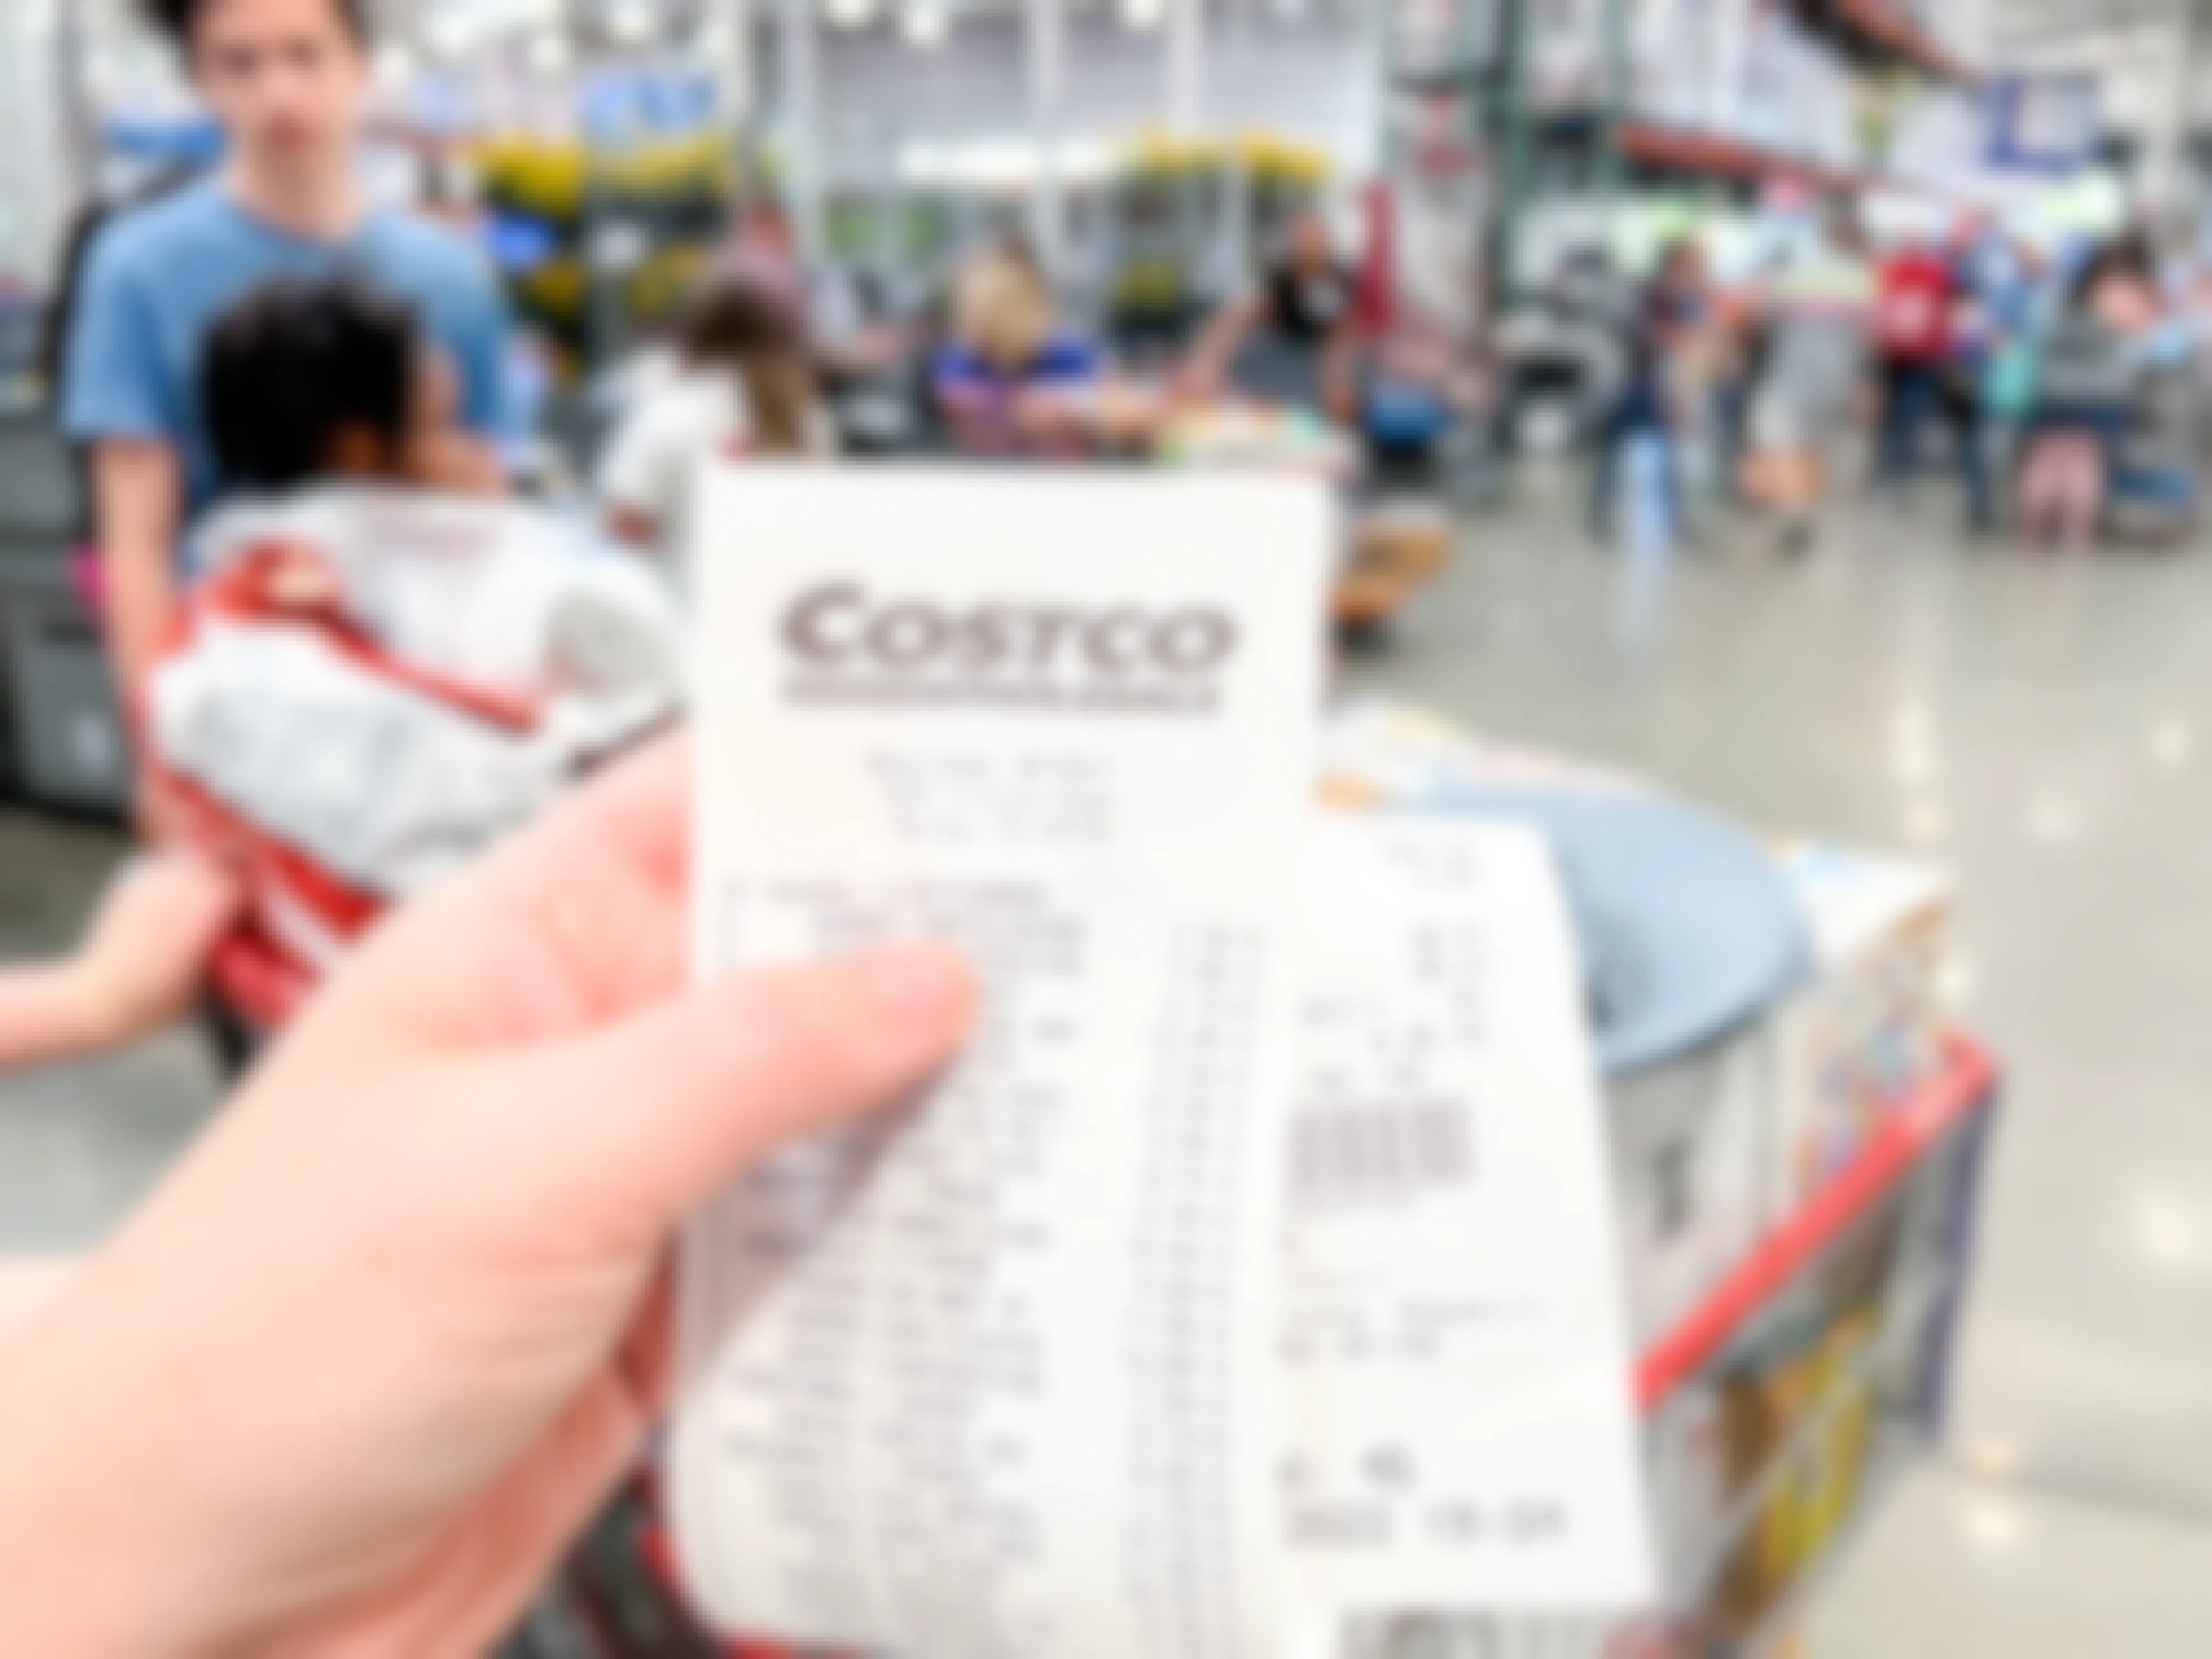 A person holding a long Costco receipt in front of a shopping basket.